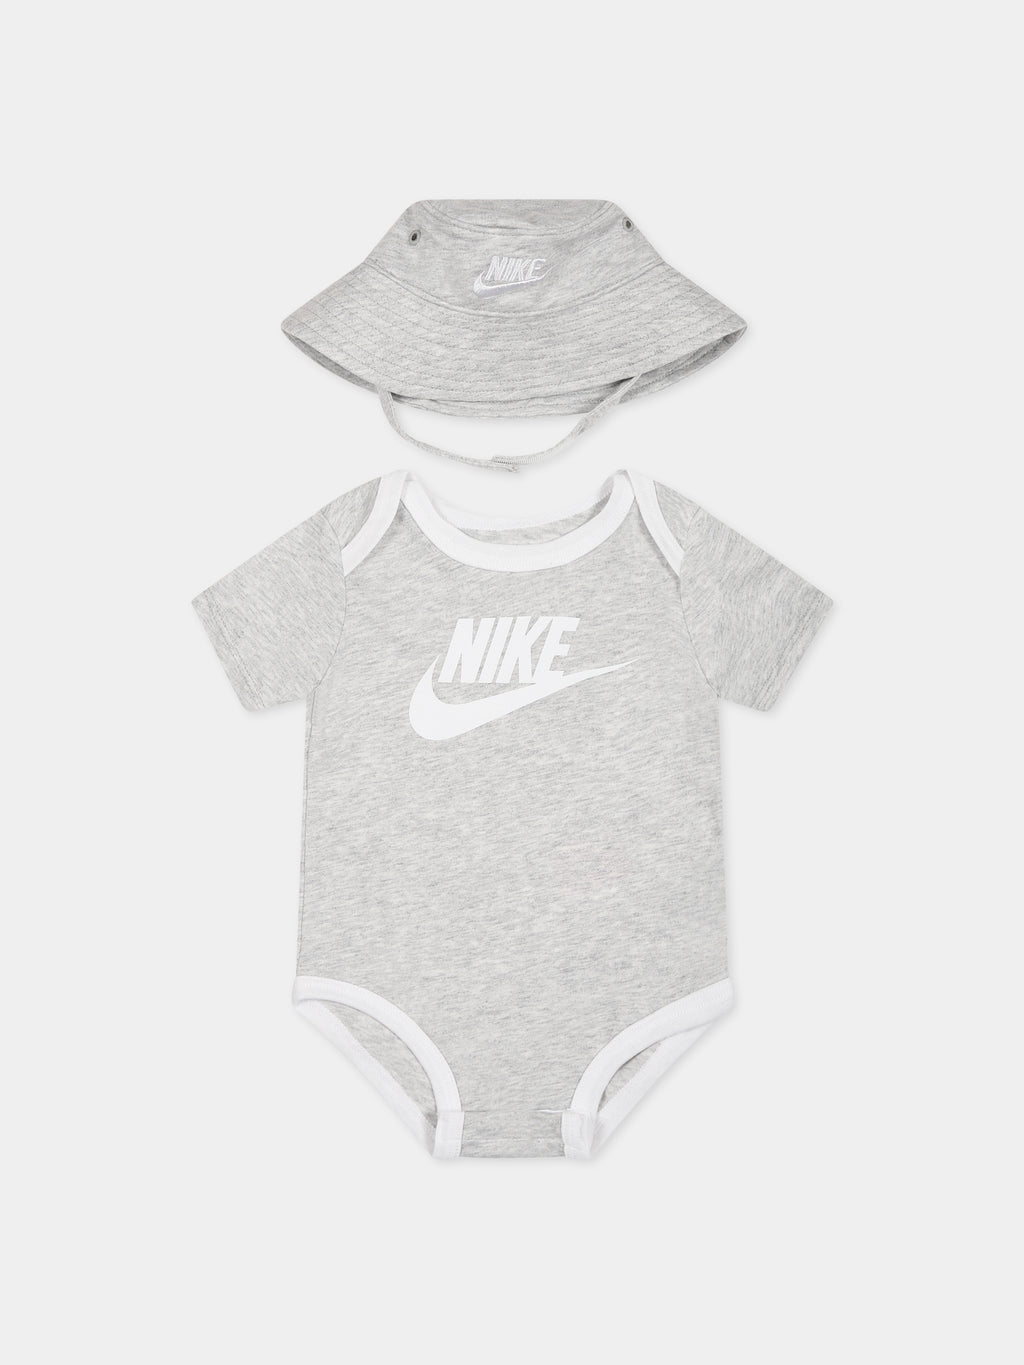 Grey set for baby kids with logo